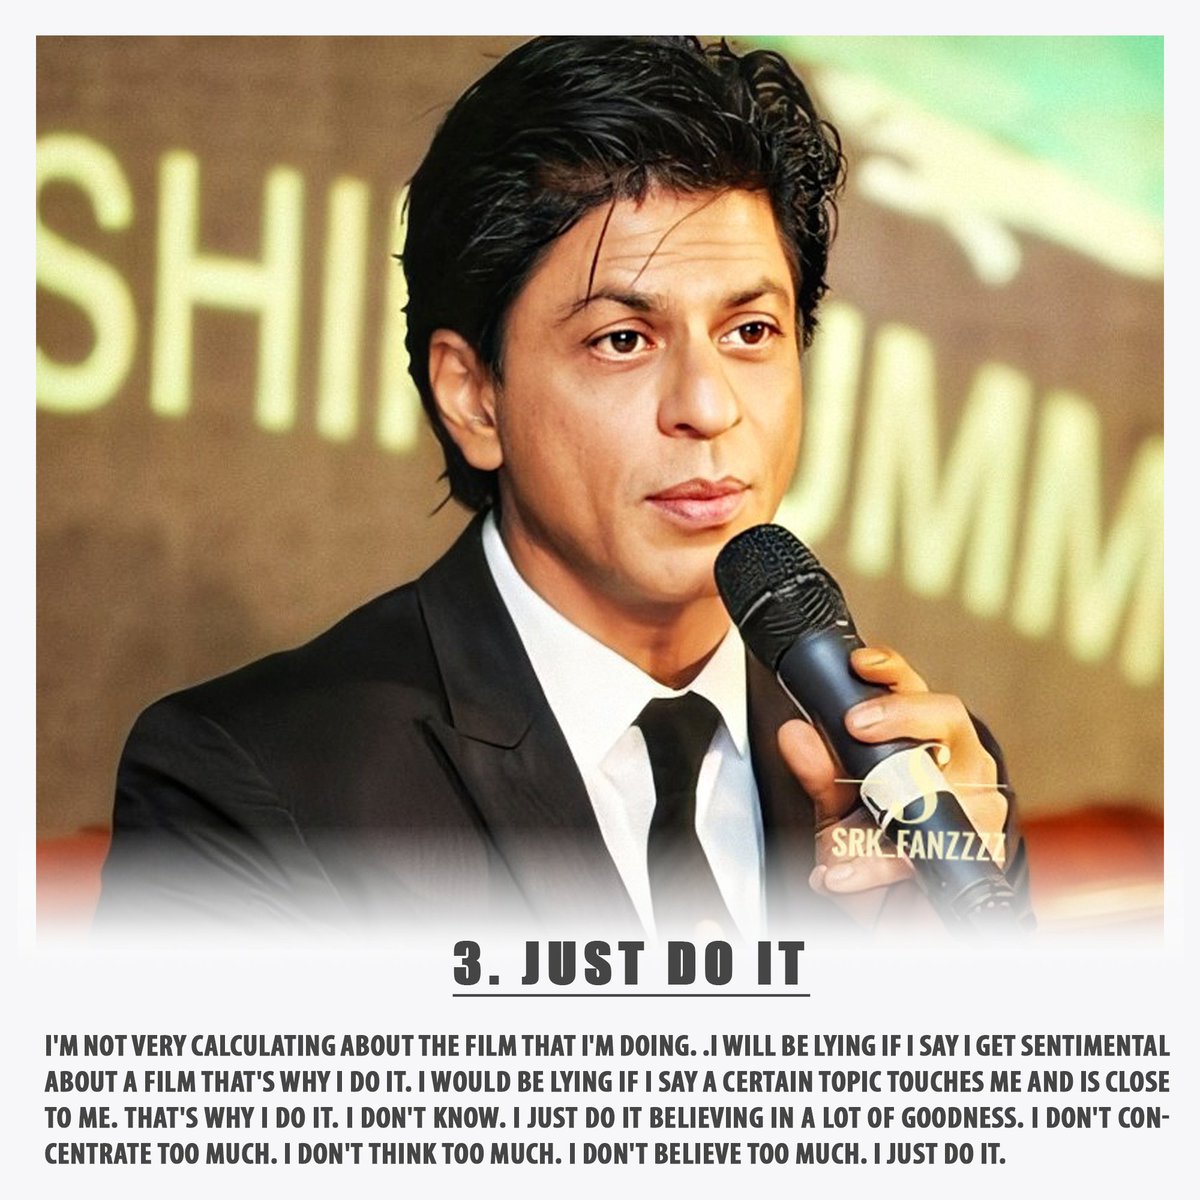 SRK has always been an inspiration. He has taught us useful things not only via films or speeches, but his complete life is an inspiration.For those who need it, SHAH RUKH KHAN'S TOP 13 RULES FOR SUCCESS (1/4) @iamsrk  #HappyTeachersDay #ShahRukhKhan